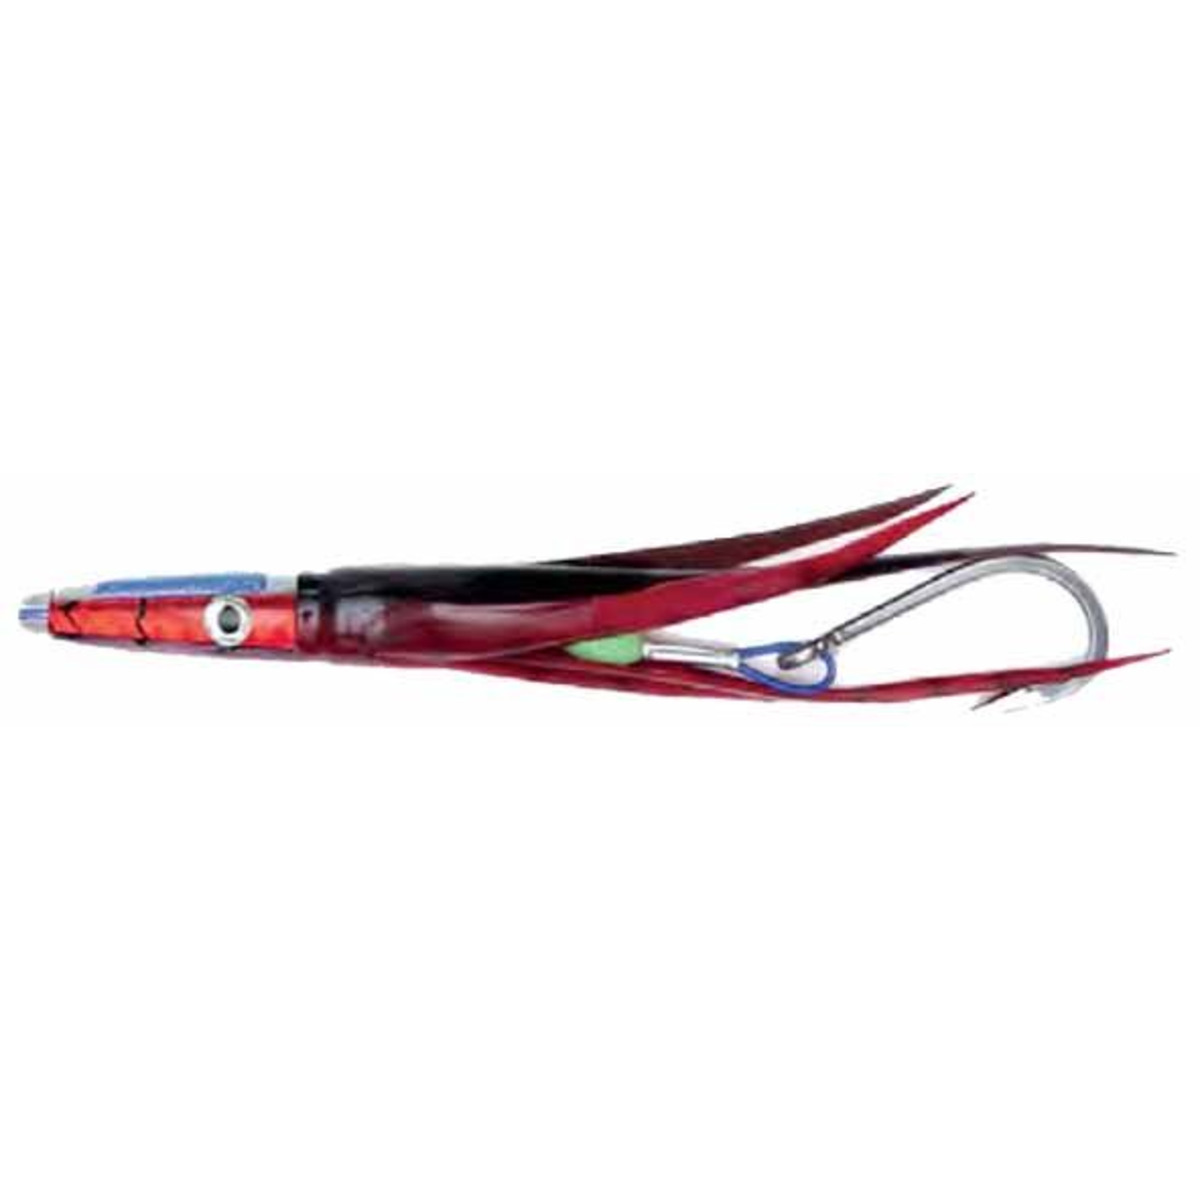 H2o Pro Shallow Tail - Red Black - 12 cm